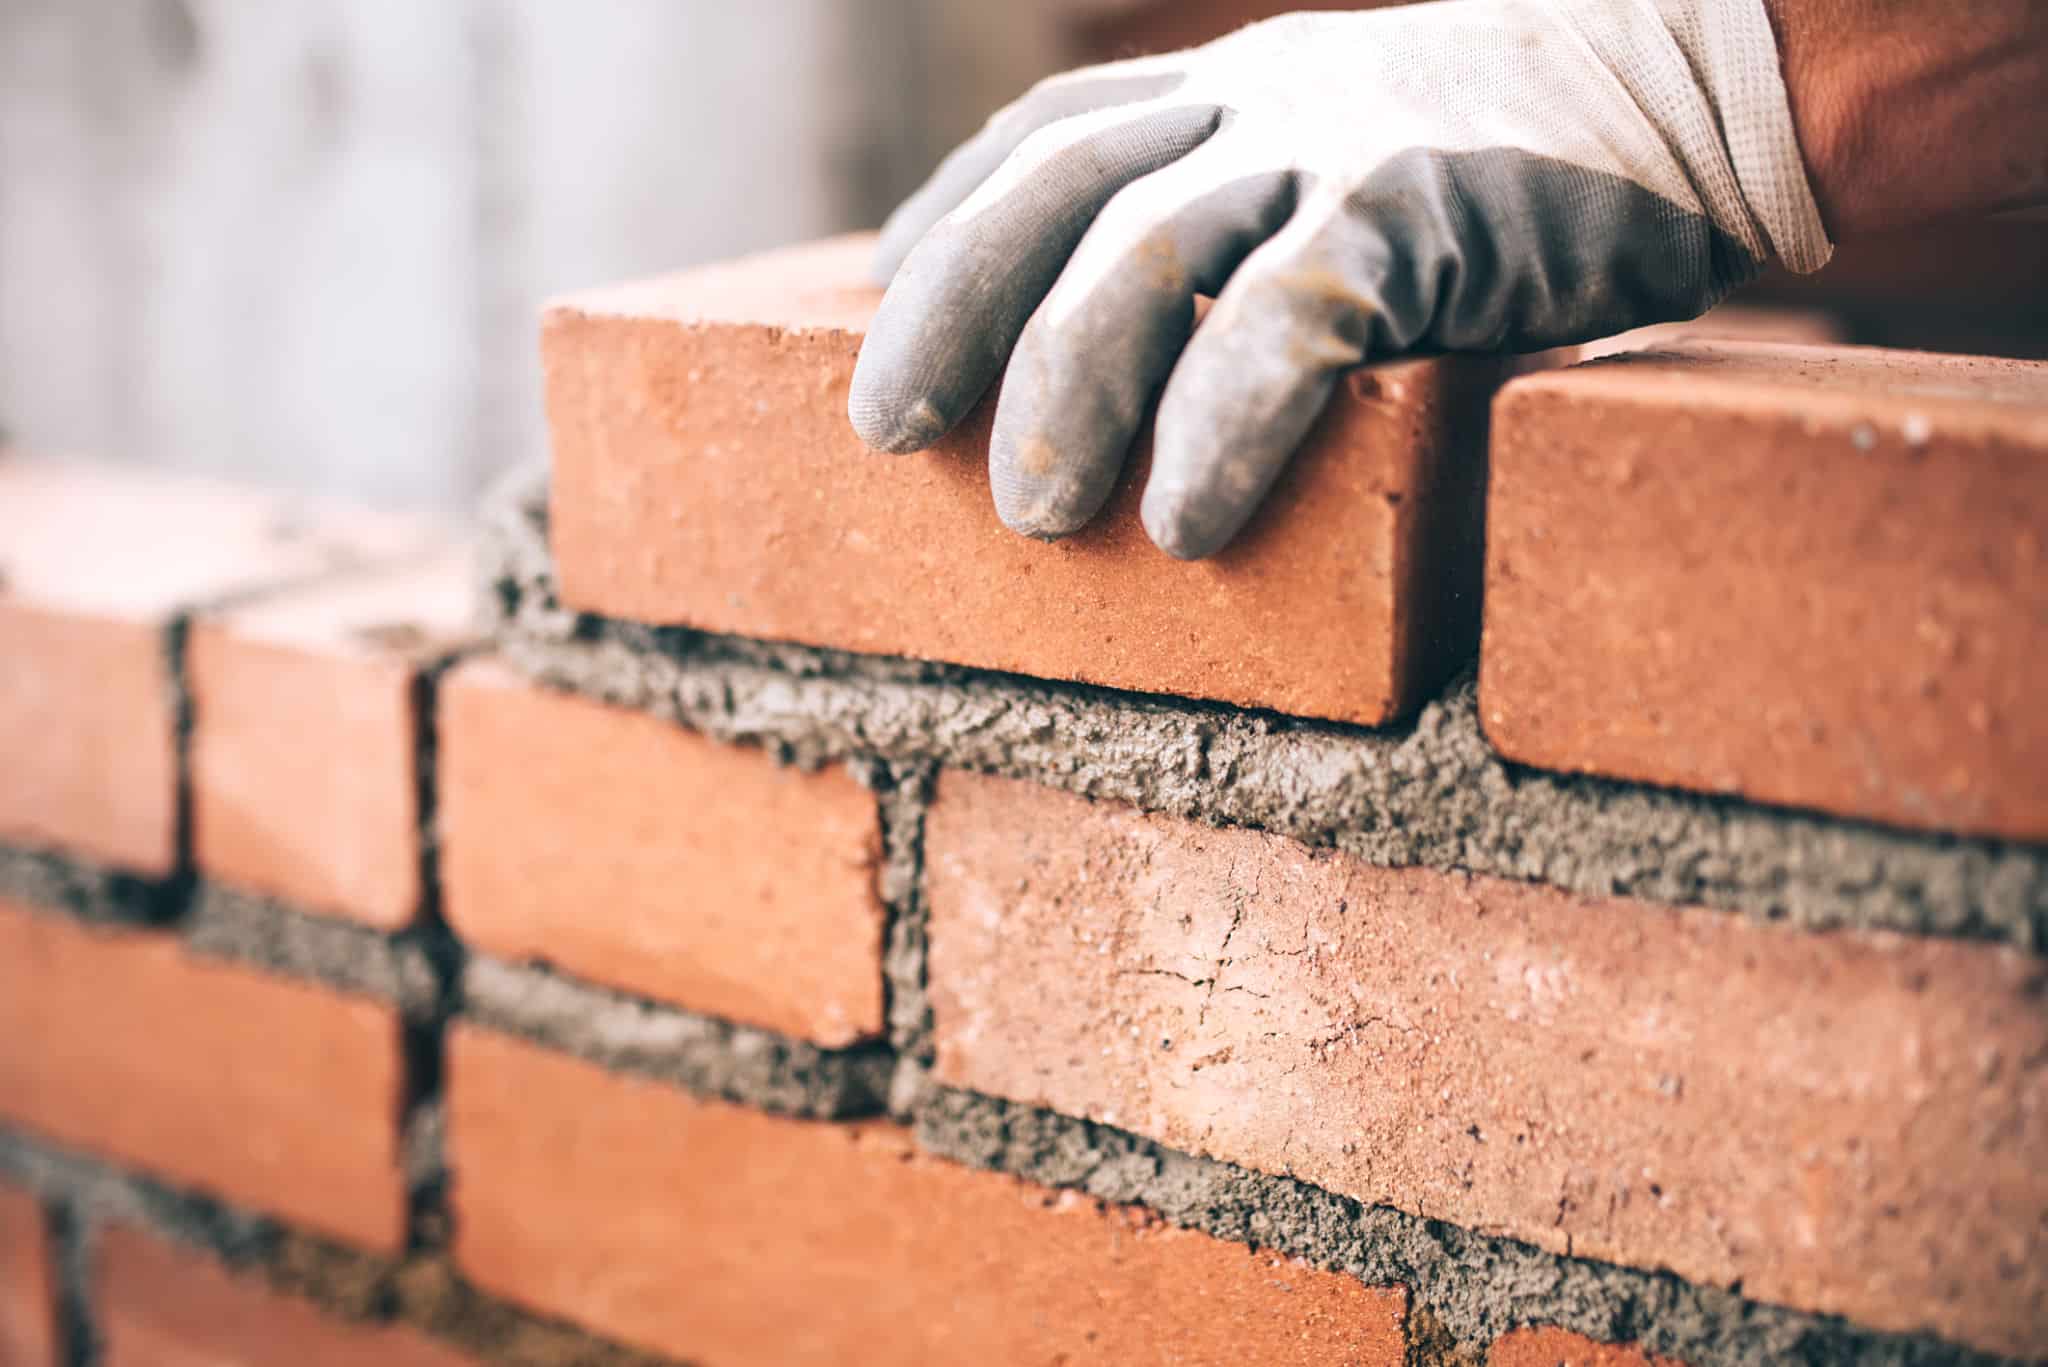 This image shows a close-up view of a person's hands wearing gloves while laying bricks. The hands are carefully positioning a red clay brick on top of a layer of mortar, creating a sturdy brick wall. The bricks have a rough, textured surface, and the mortar between them is visible. This image captures the skilled craftsmanship and attention to detail involved in the masonry work.